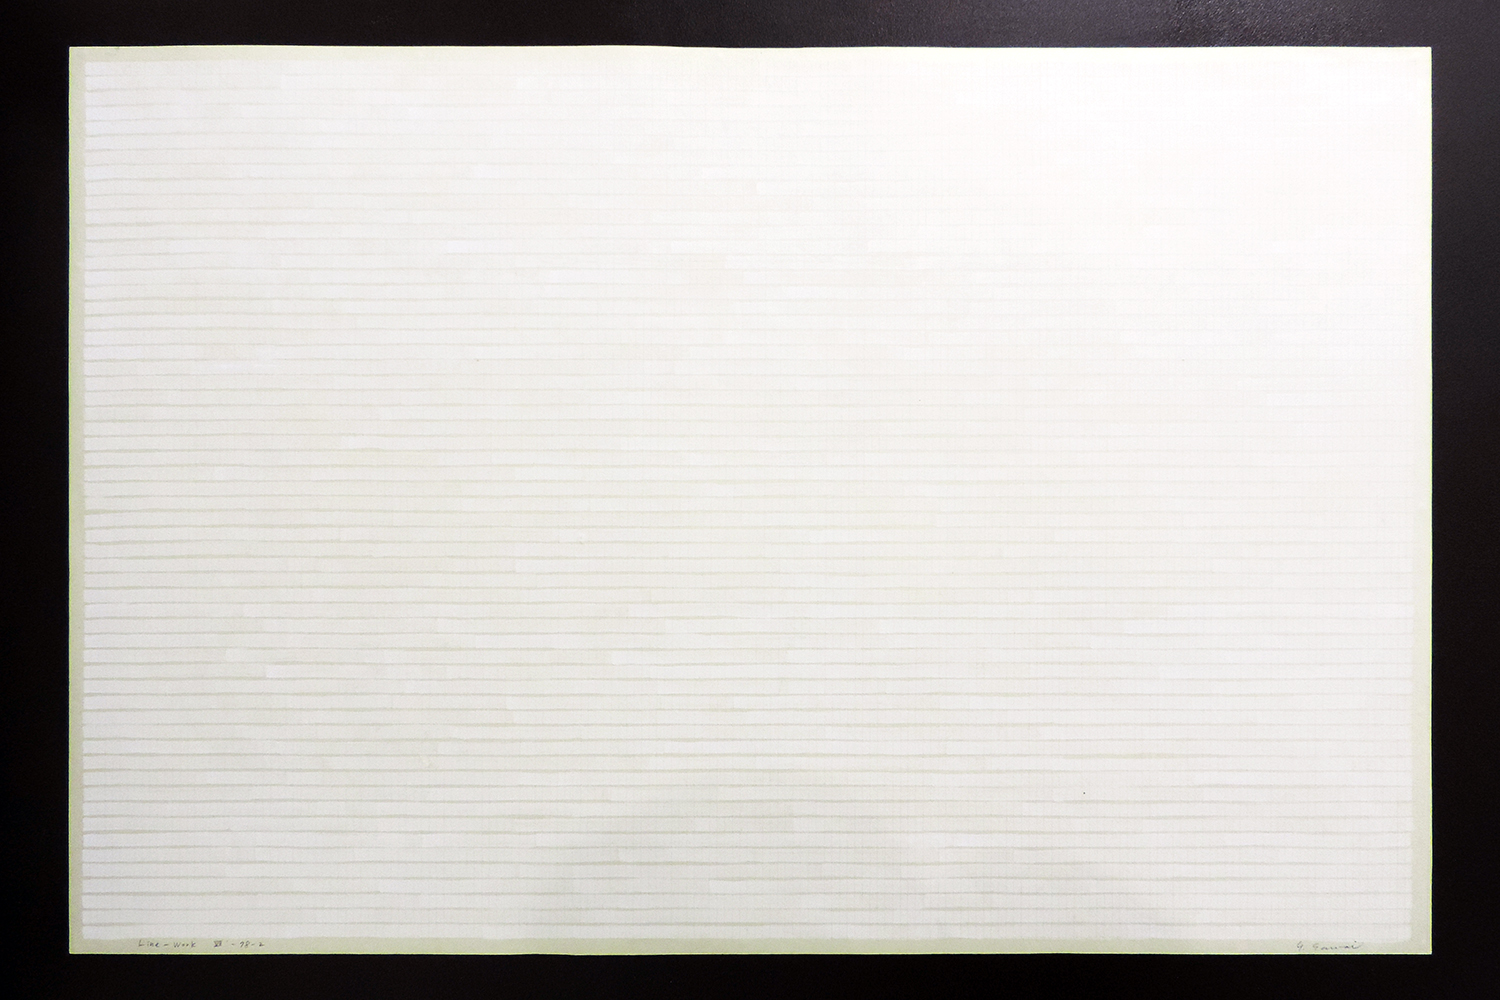 Line-Work VII-78-2 ｜Acrylic, Red pencl, Watson paper｜60 x 90 cm｜1978